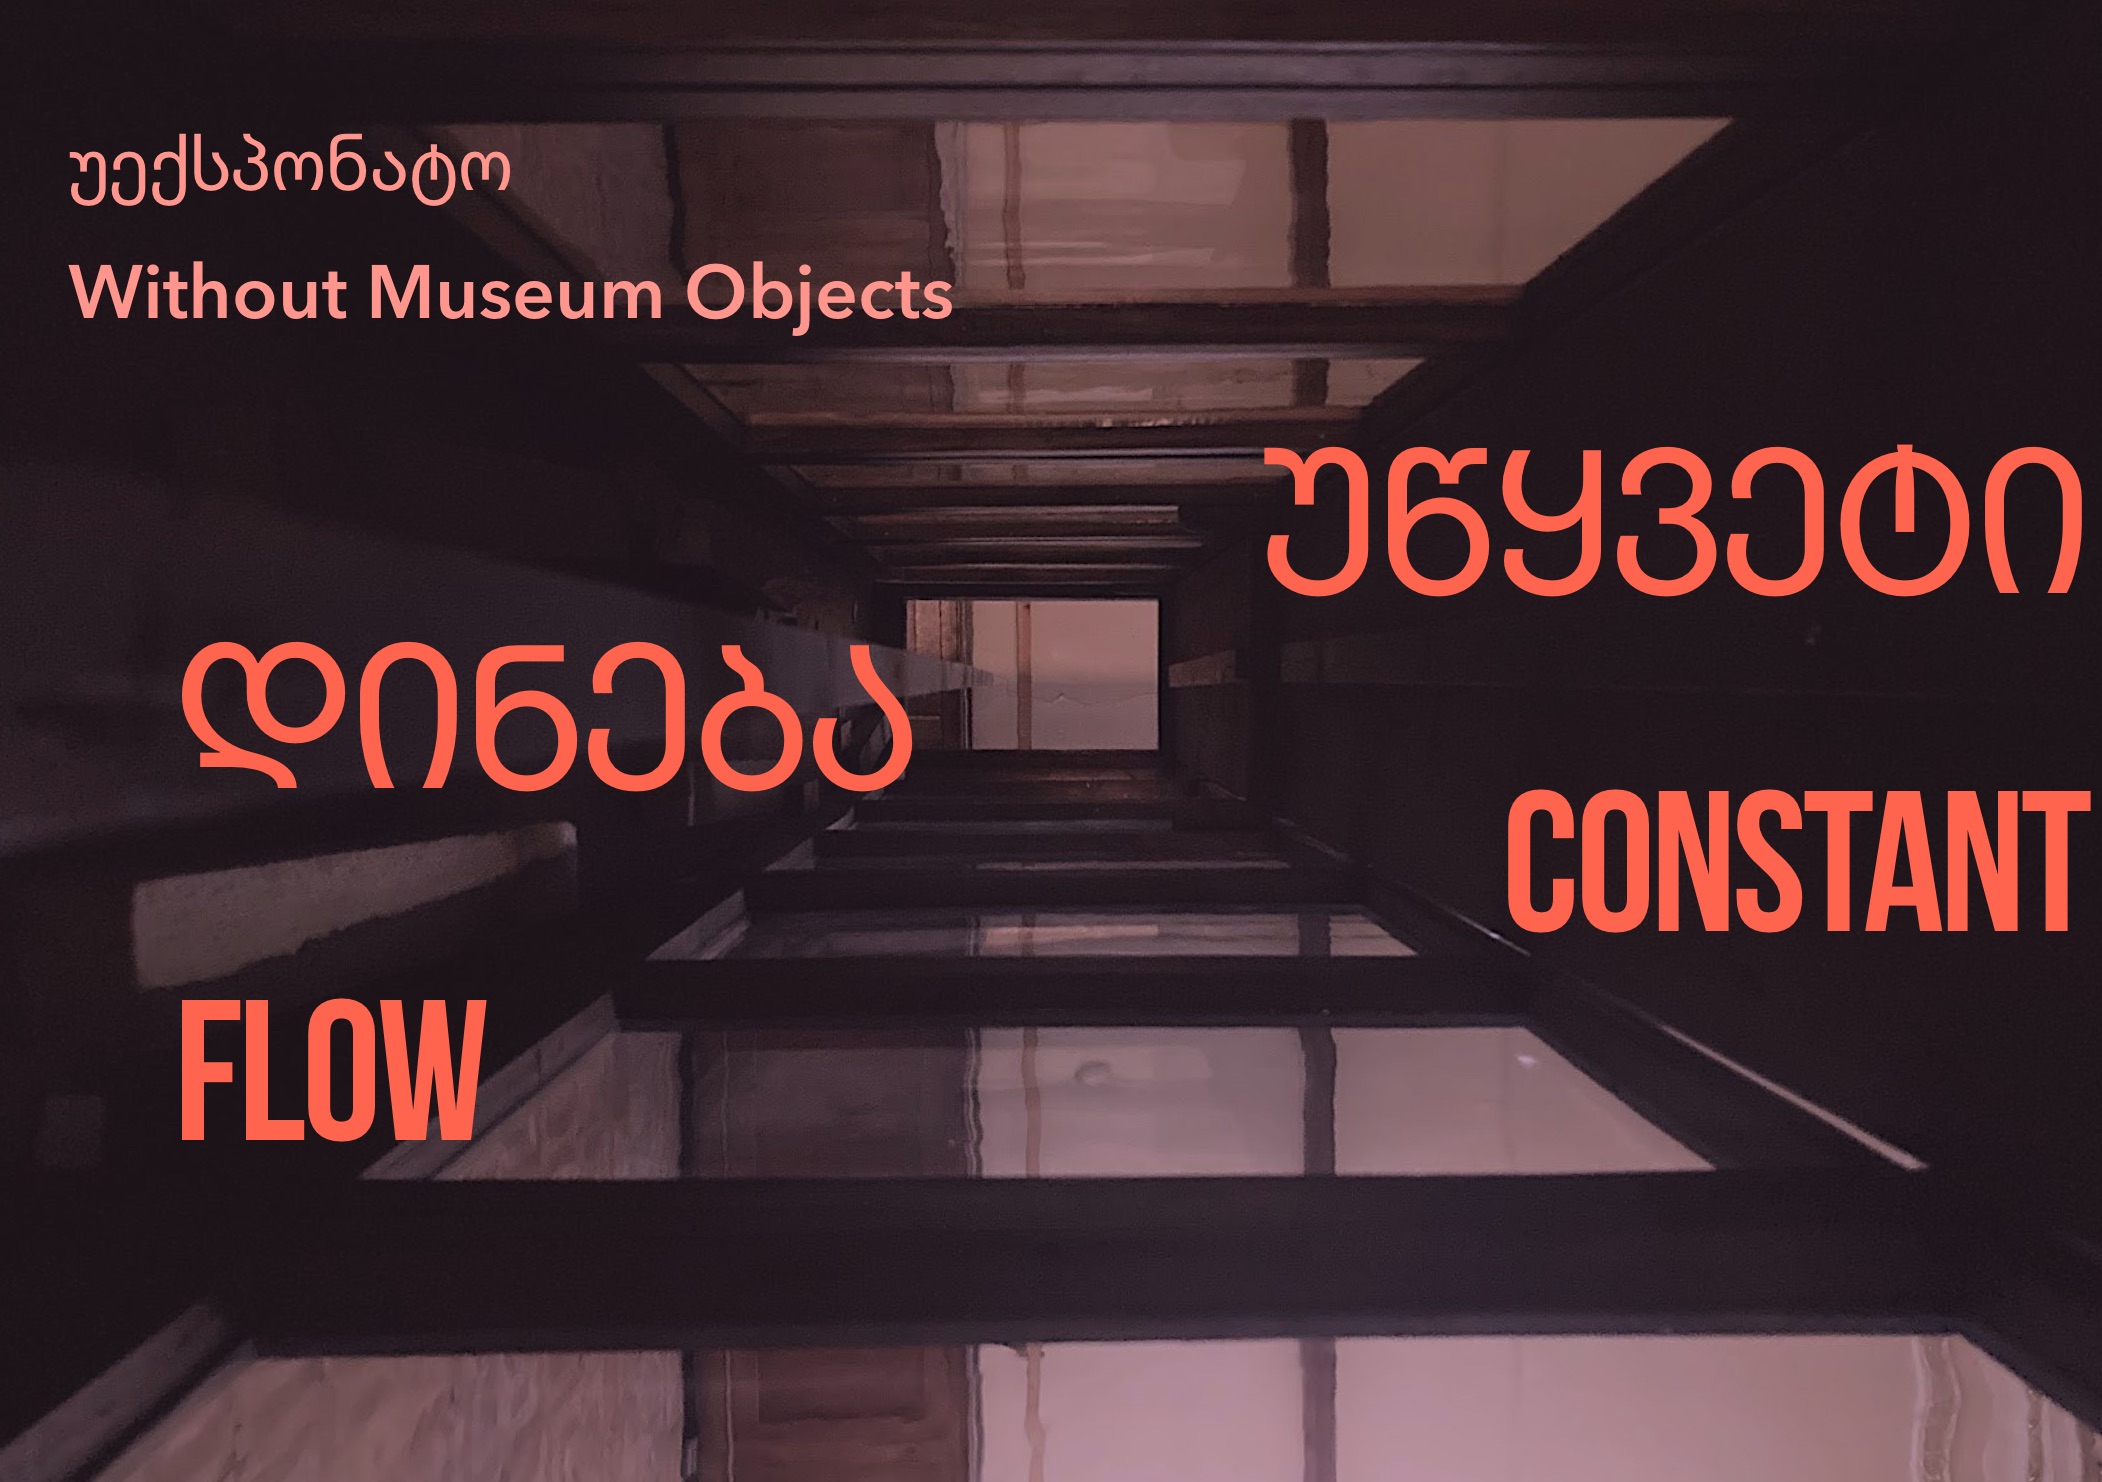 Without Museum Objects: Constant Flow